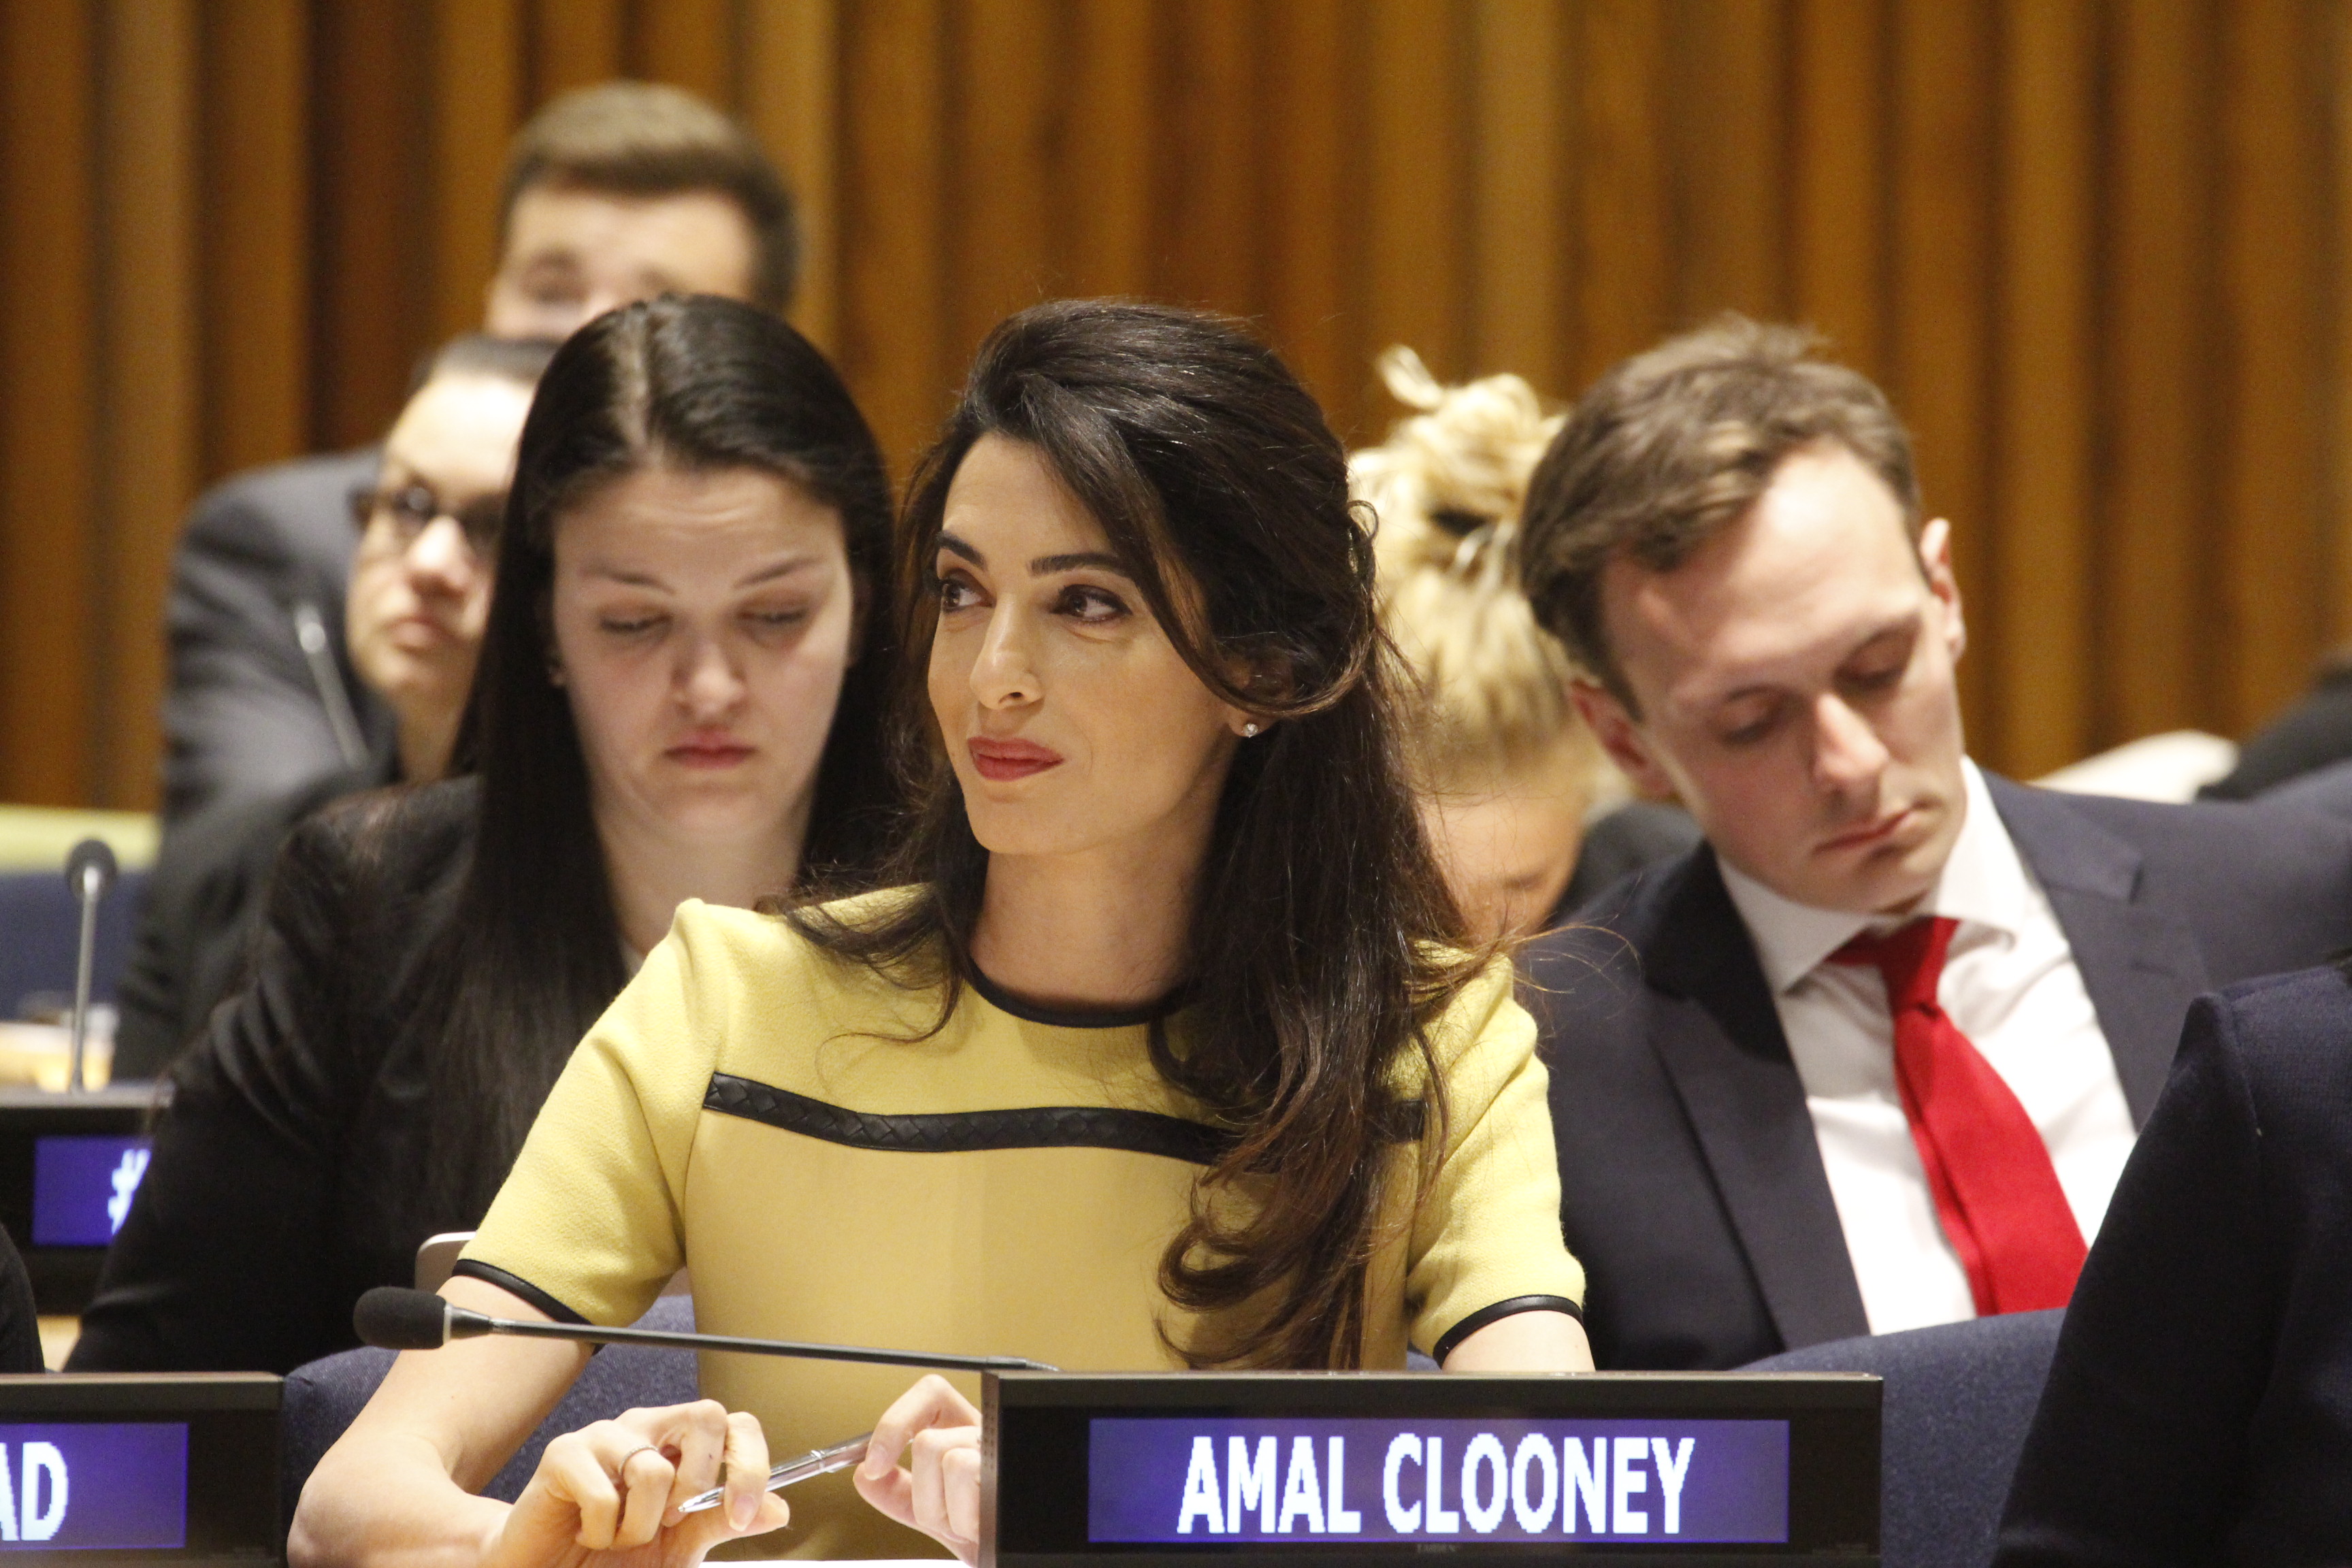 Groups urge Amal Clooney to pressure UK to act on Bahrain’s abuse of freedom of expression